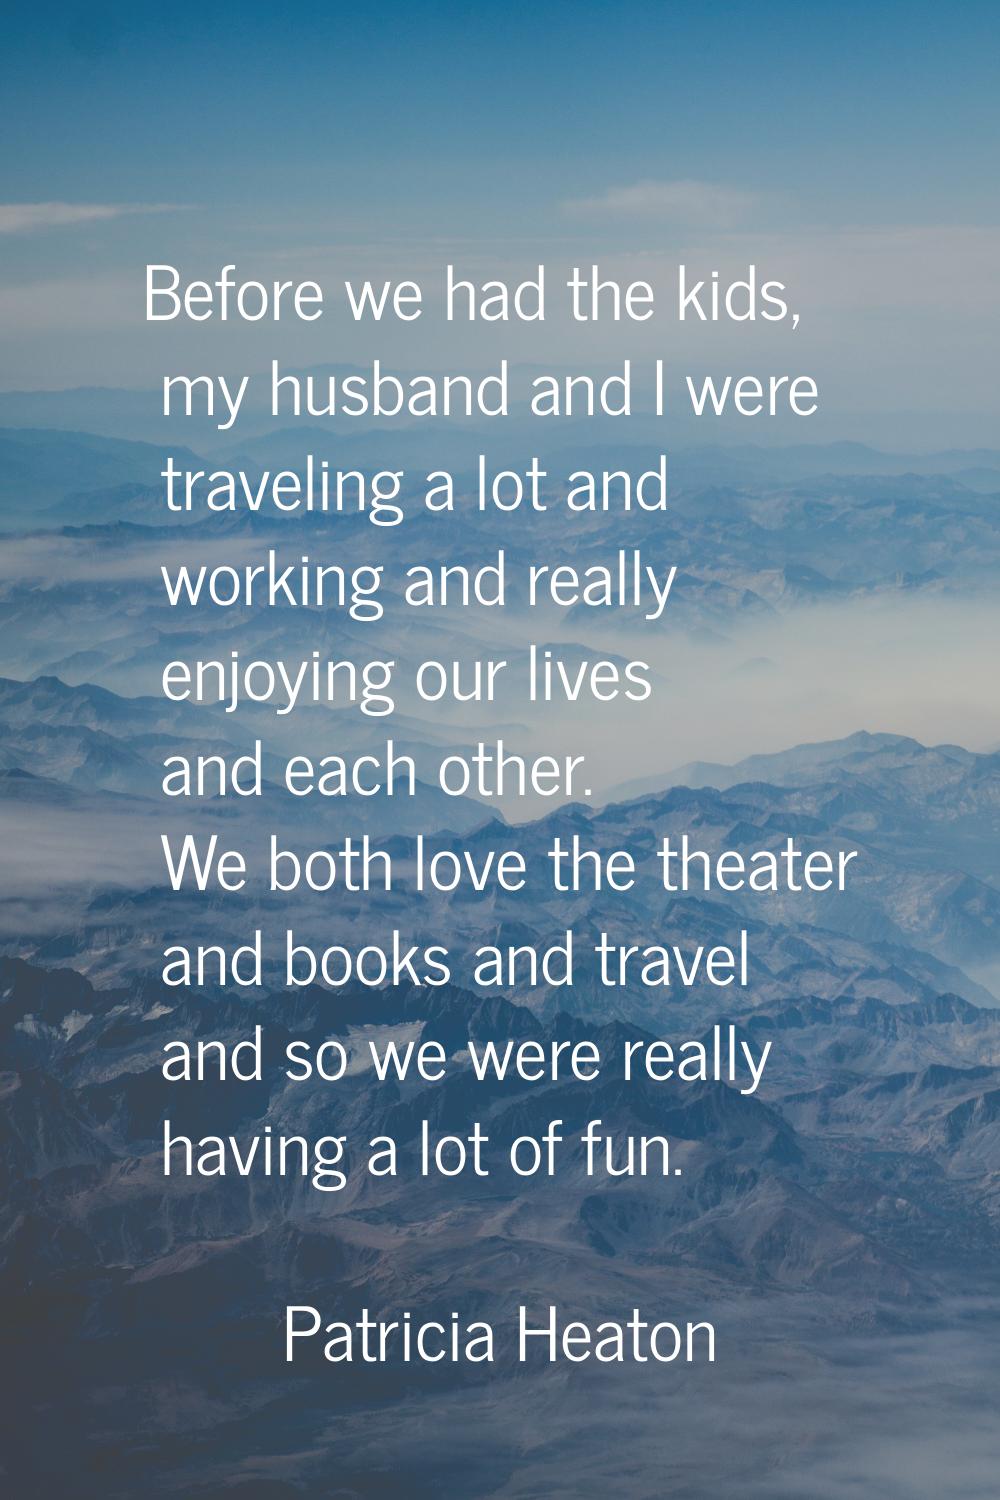 Before we had the kids, my husband and I were traveling a lot and working and really enjoying our l